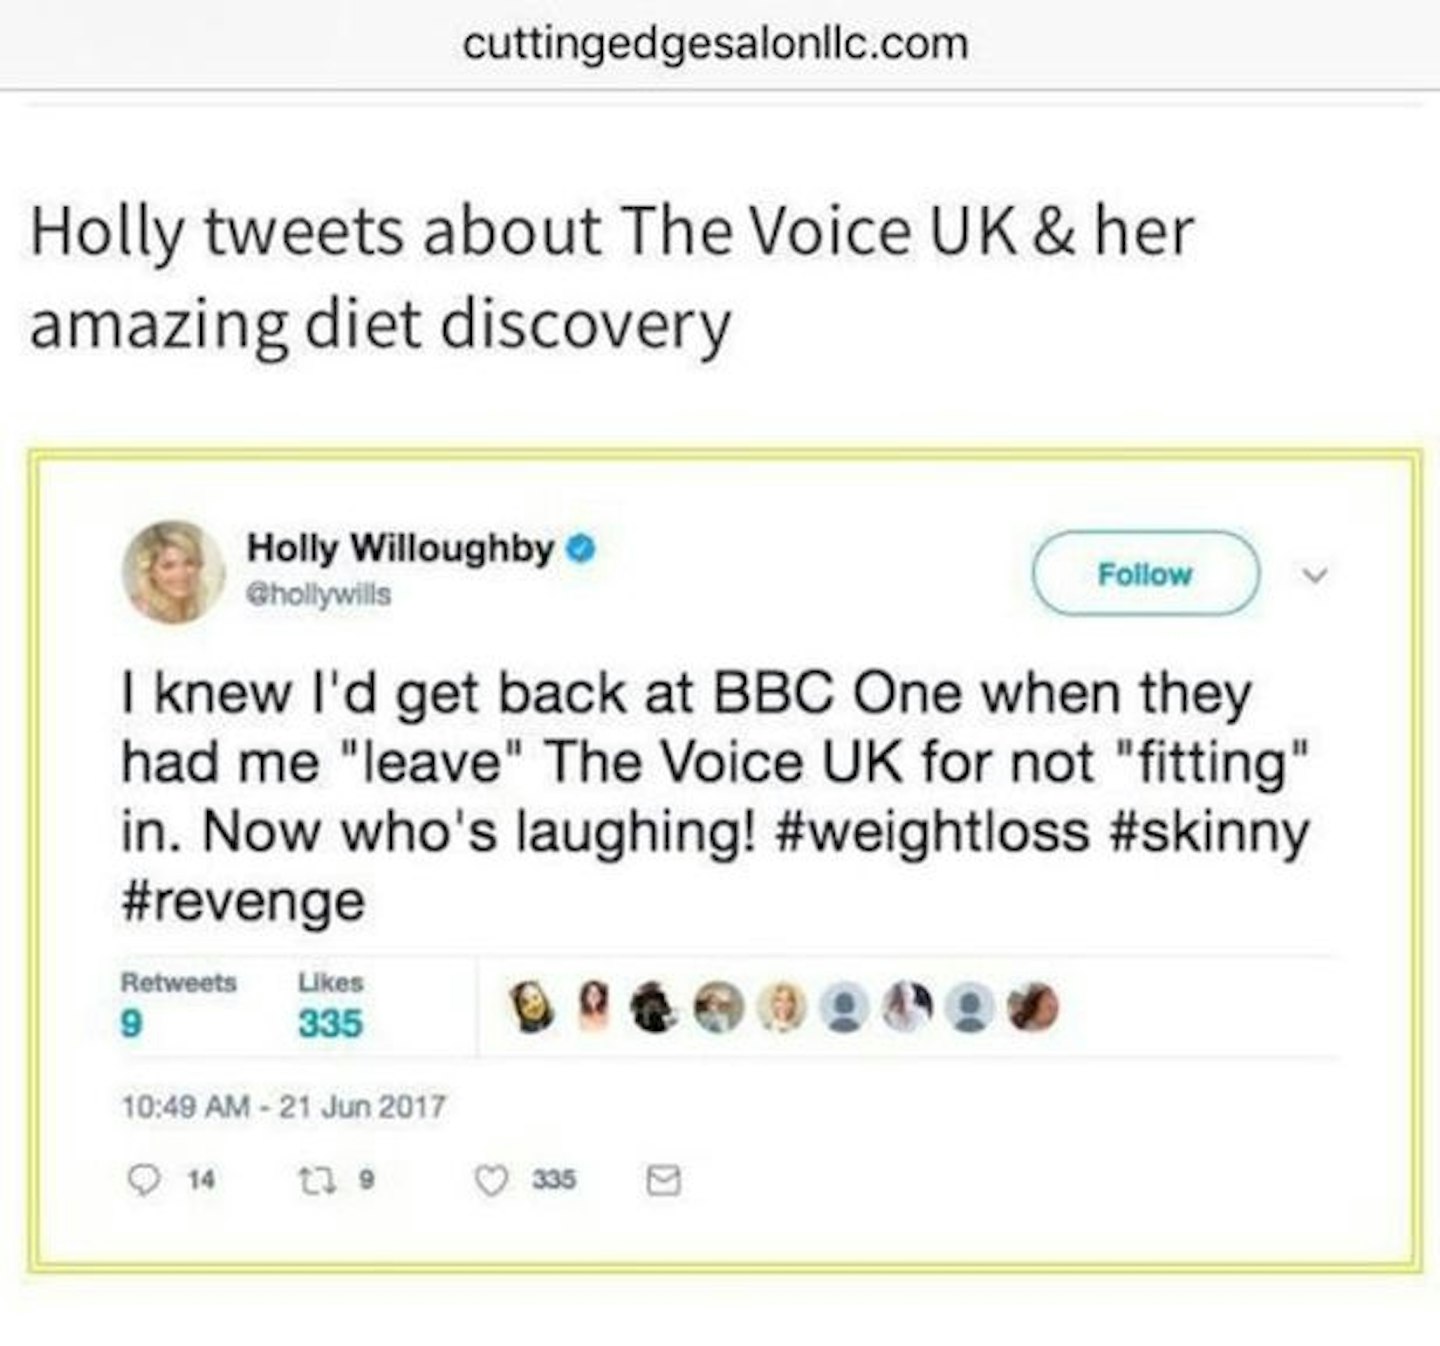 Holly Willoughby quit This Morning